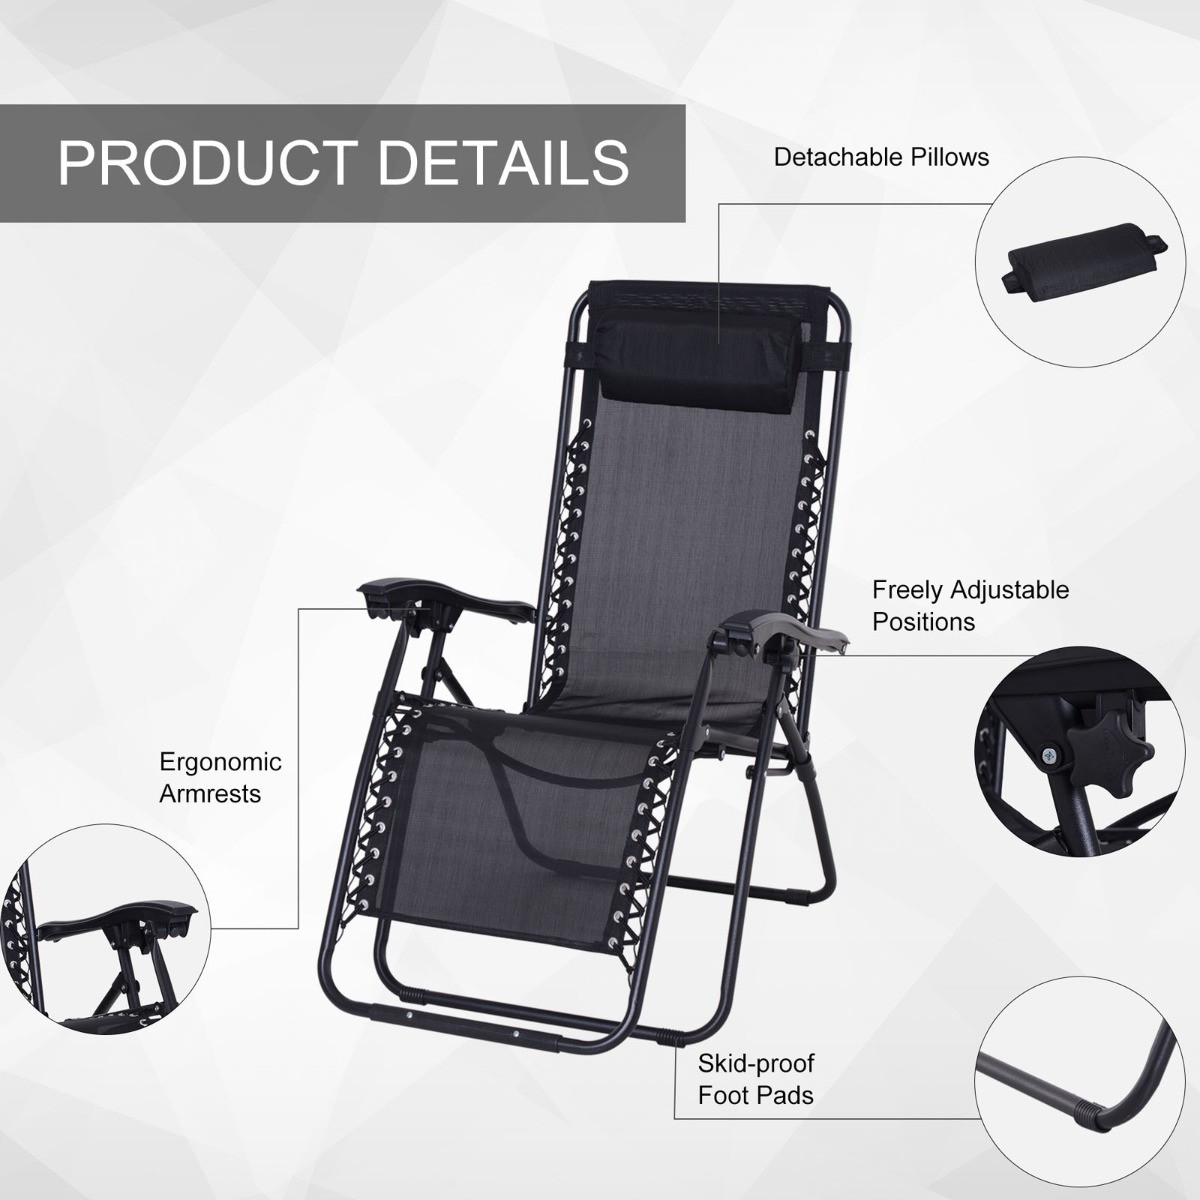 Outsunny Zero-Gravity Chairs With Foldable Table, Black - 2 Chairs>